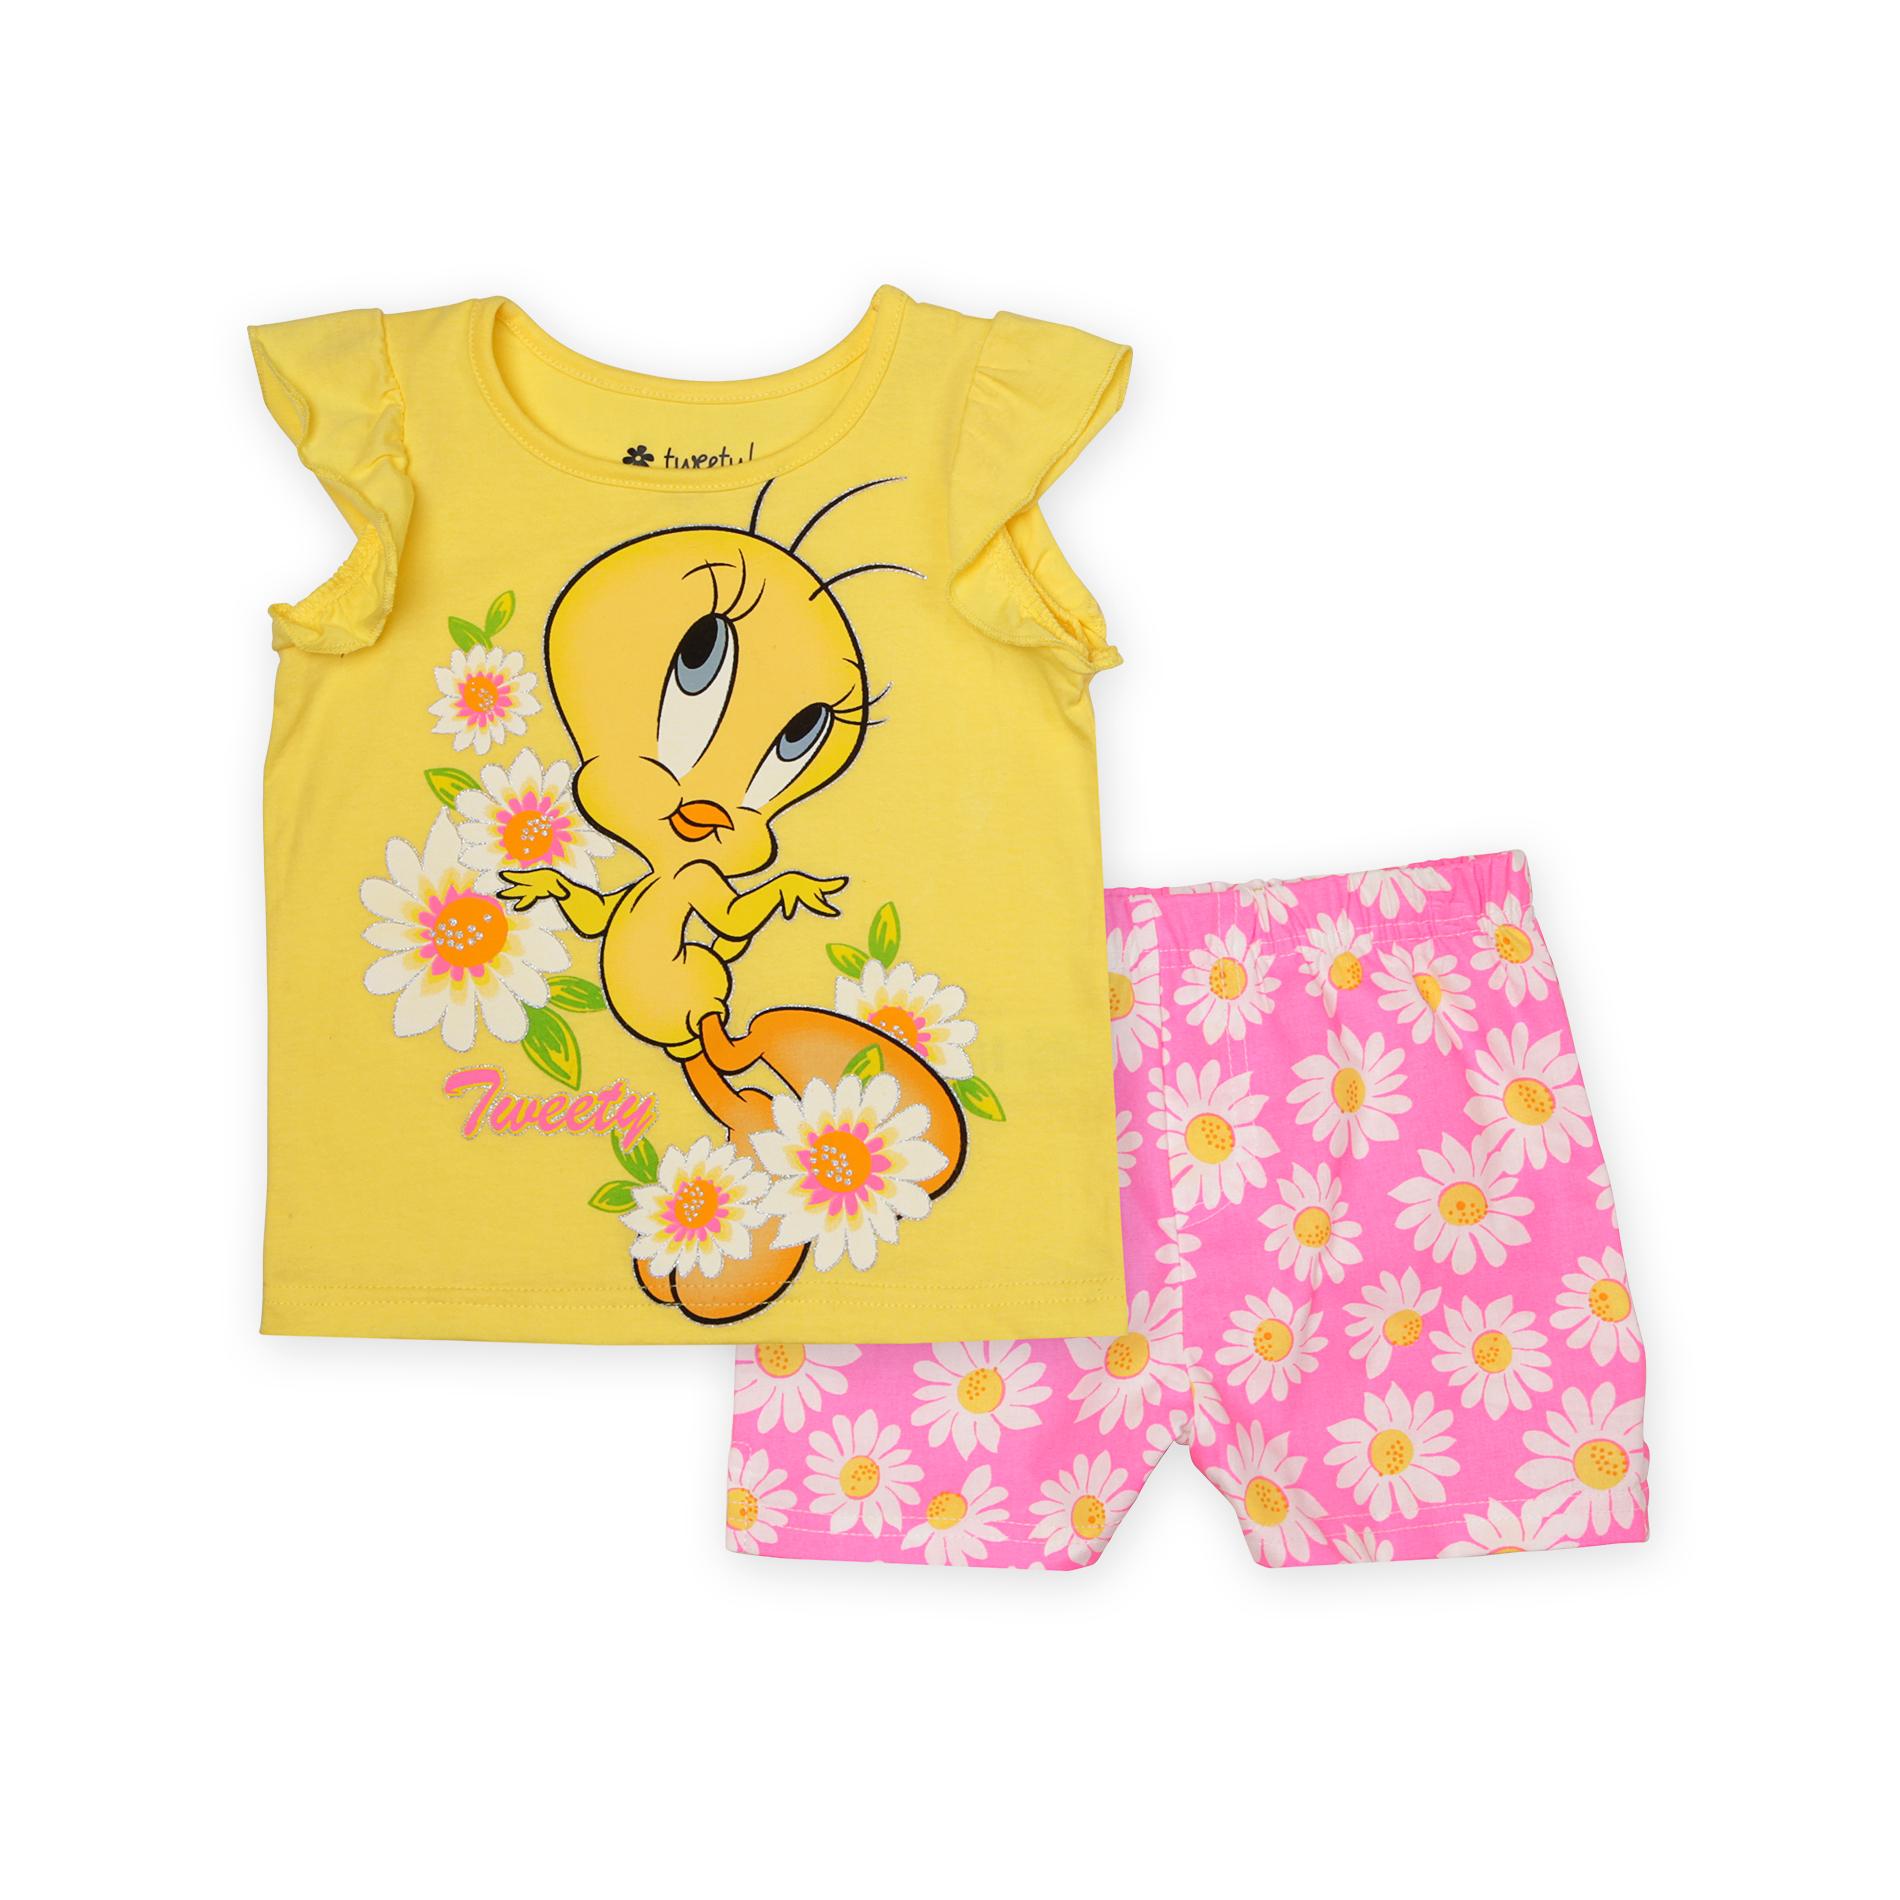 Warner Brothers Infant & Toddler Girl's Graphic T-Shirt & Shorts - Tweety Bird